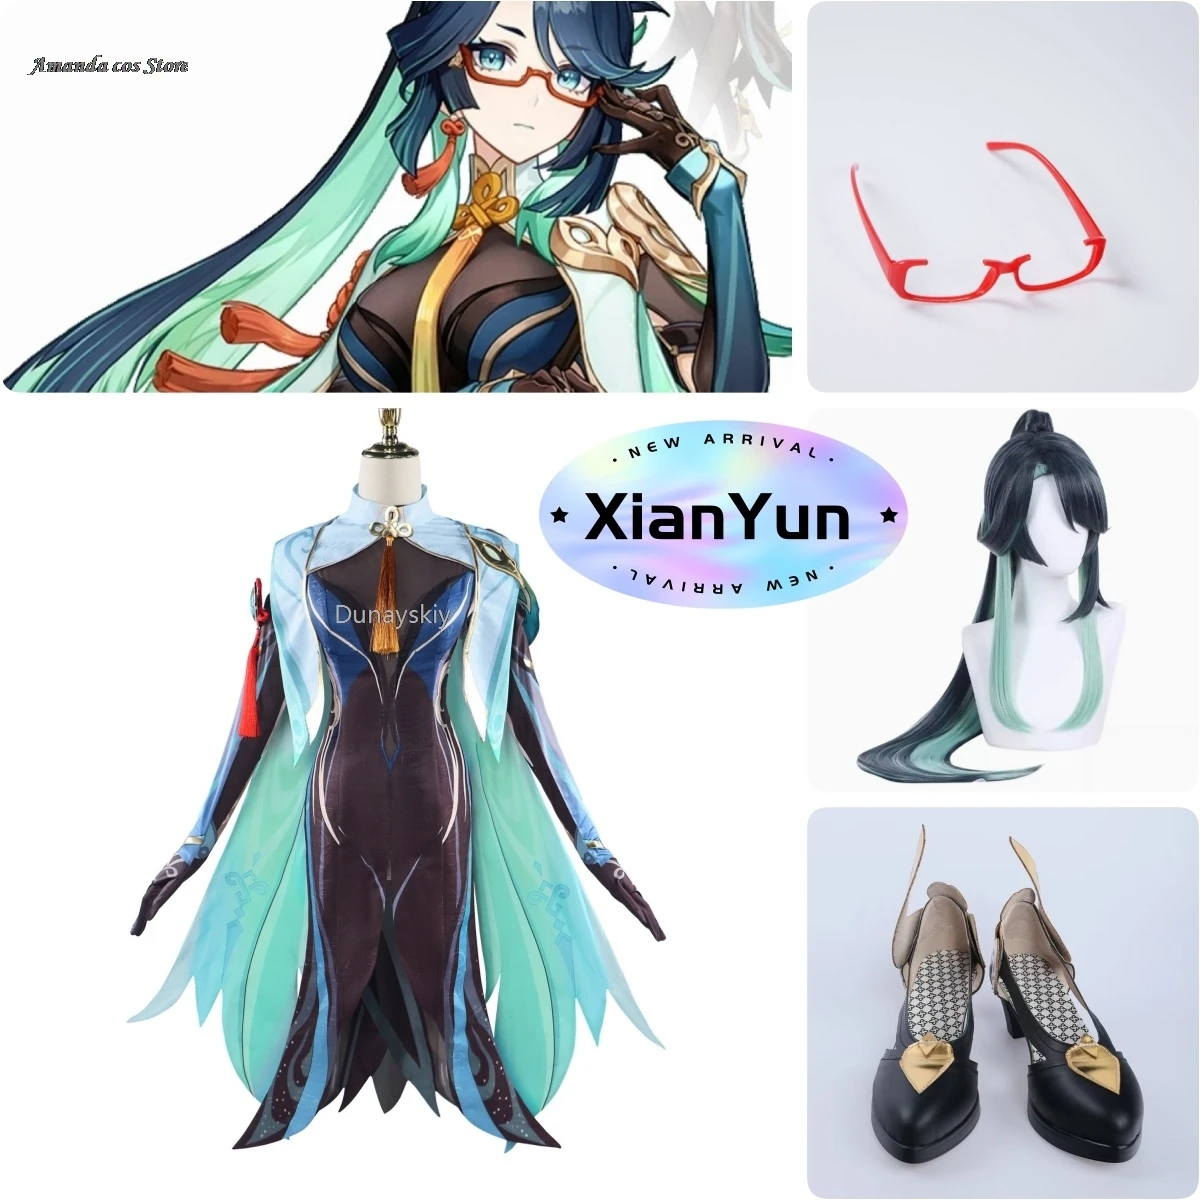 

Game Genshin Liyue Xianyun Cosplay Anime Cloud Retainer Costume Dress Wig Chinese Style Costume For Women Halloween Party Suit